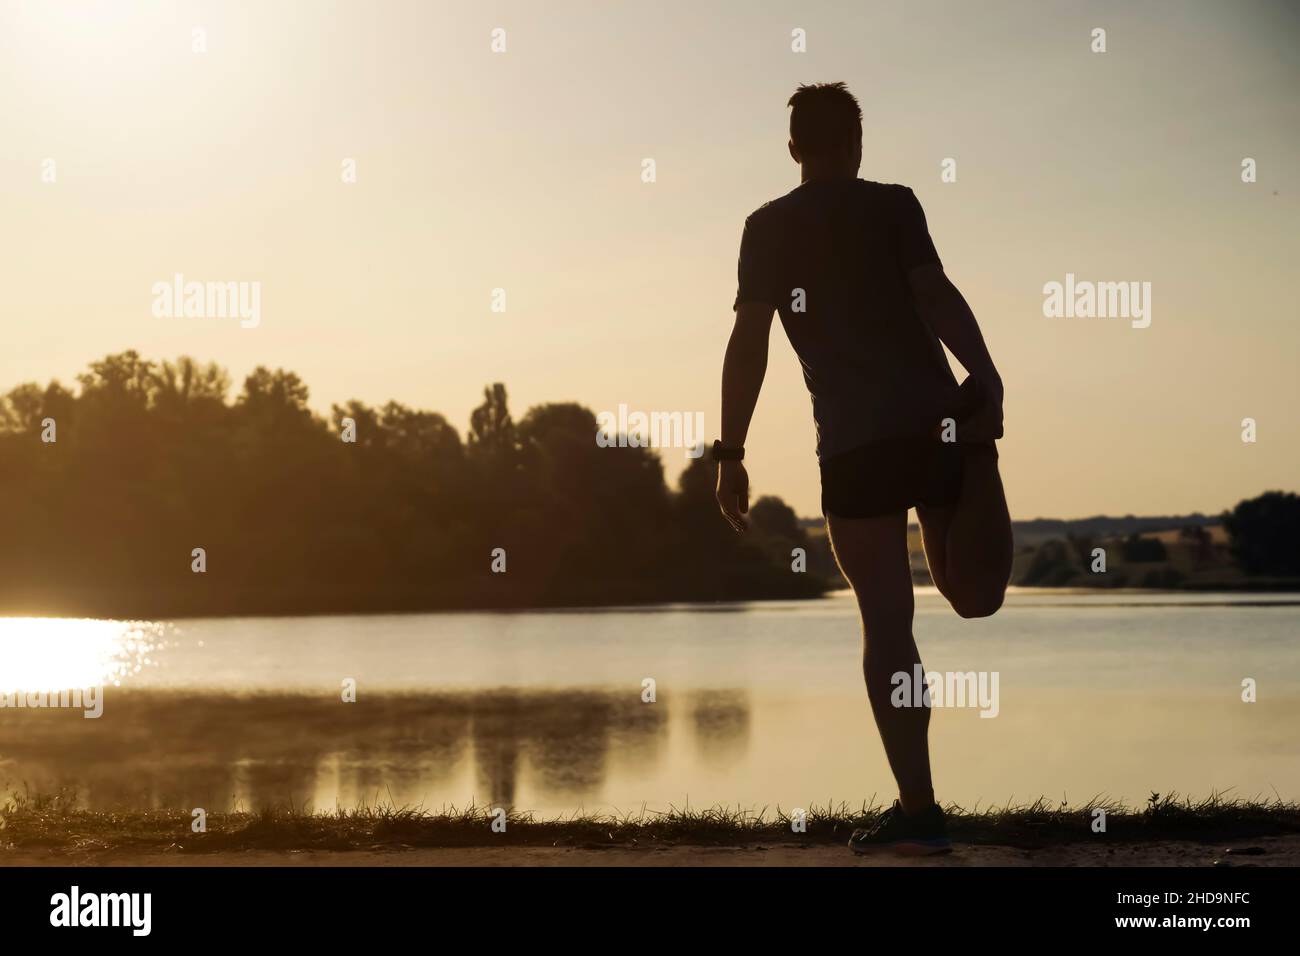 Man is training, running, warming up outdoor. Stock Photo